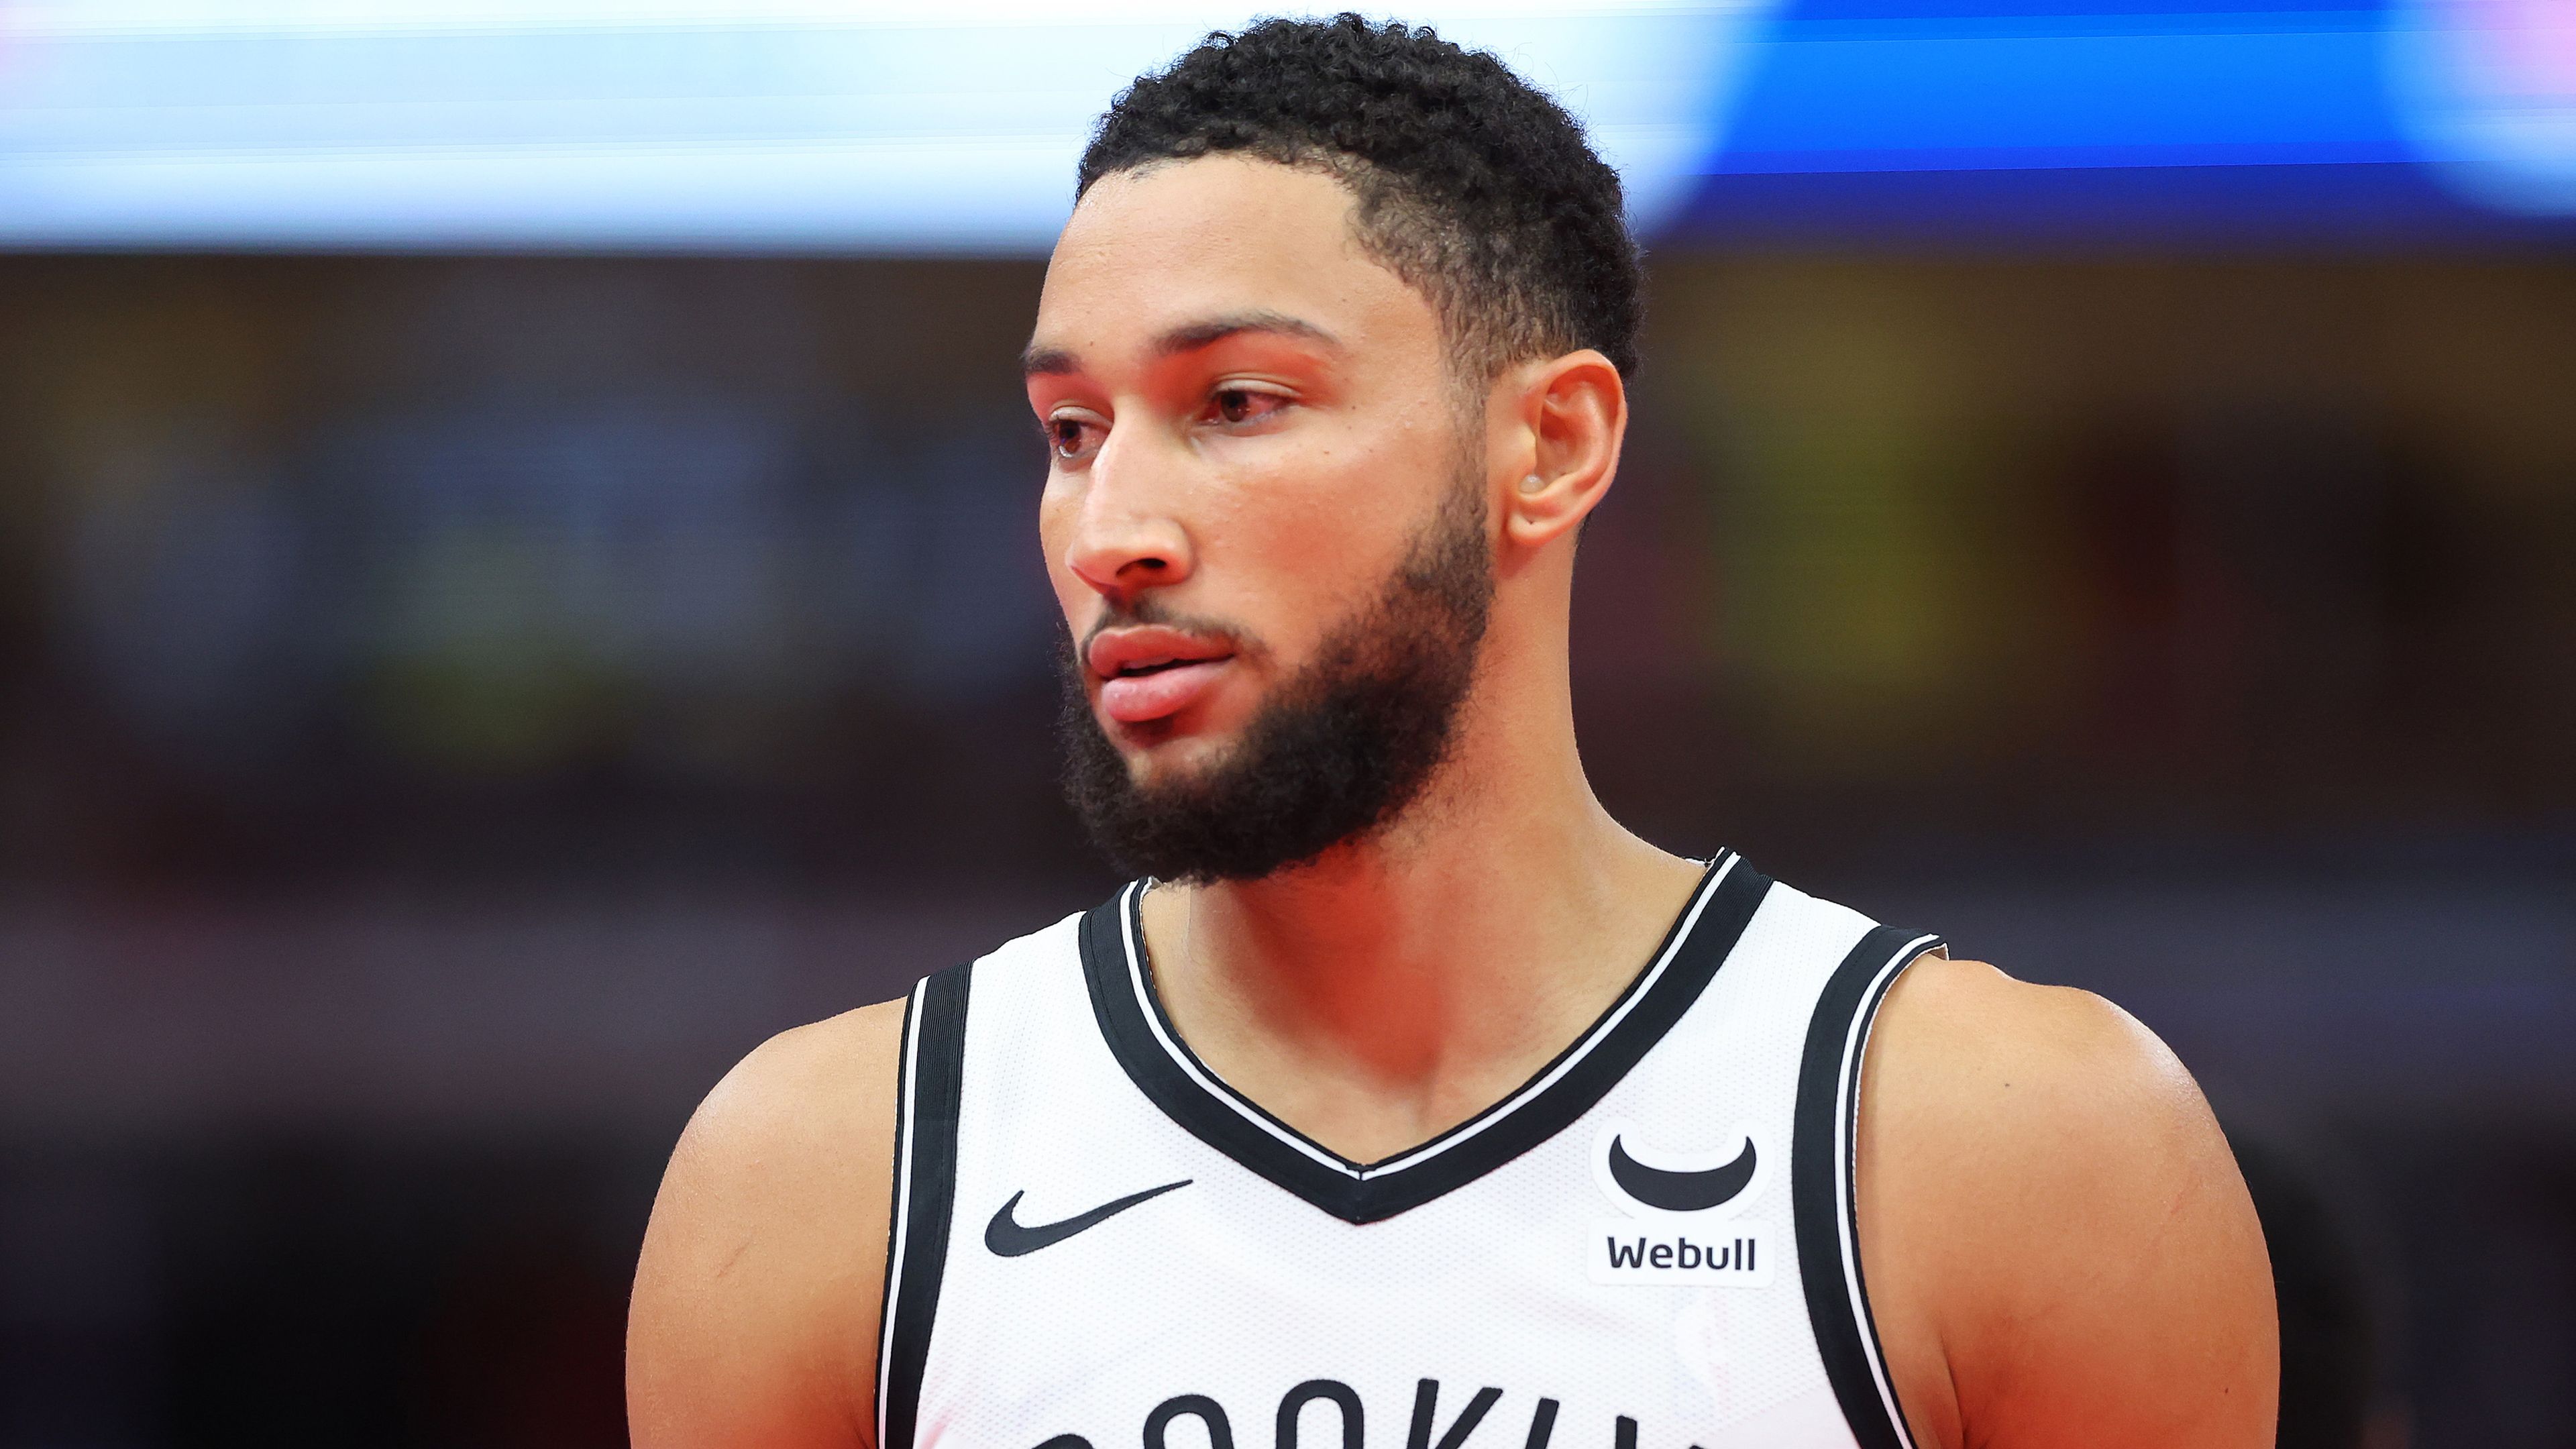 CHICAGO, ILLINOIS - NOVEMBER 03: Ben Simmons #10 of the Brooklyn Nets looks on against the Chicago Bulls in the first half of the NBA In-Season Tournament at the United Center on November 03, 2023 in Chicago, Illinois. NOTE TO USER: User expressly acknowledges and agrees that, by downloading and or using this photograph, User is consenting to the terms and conditions of the Getty Images License Agreement. (Photo by Michael Reaves/Getty Images)